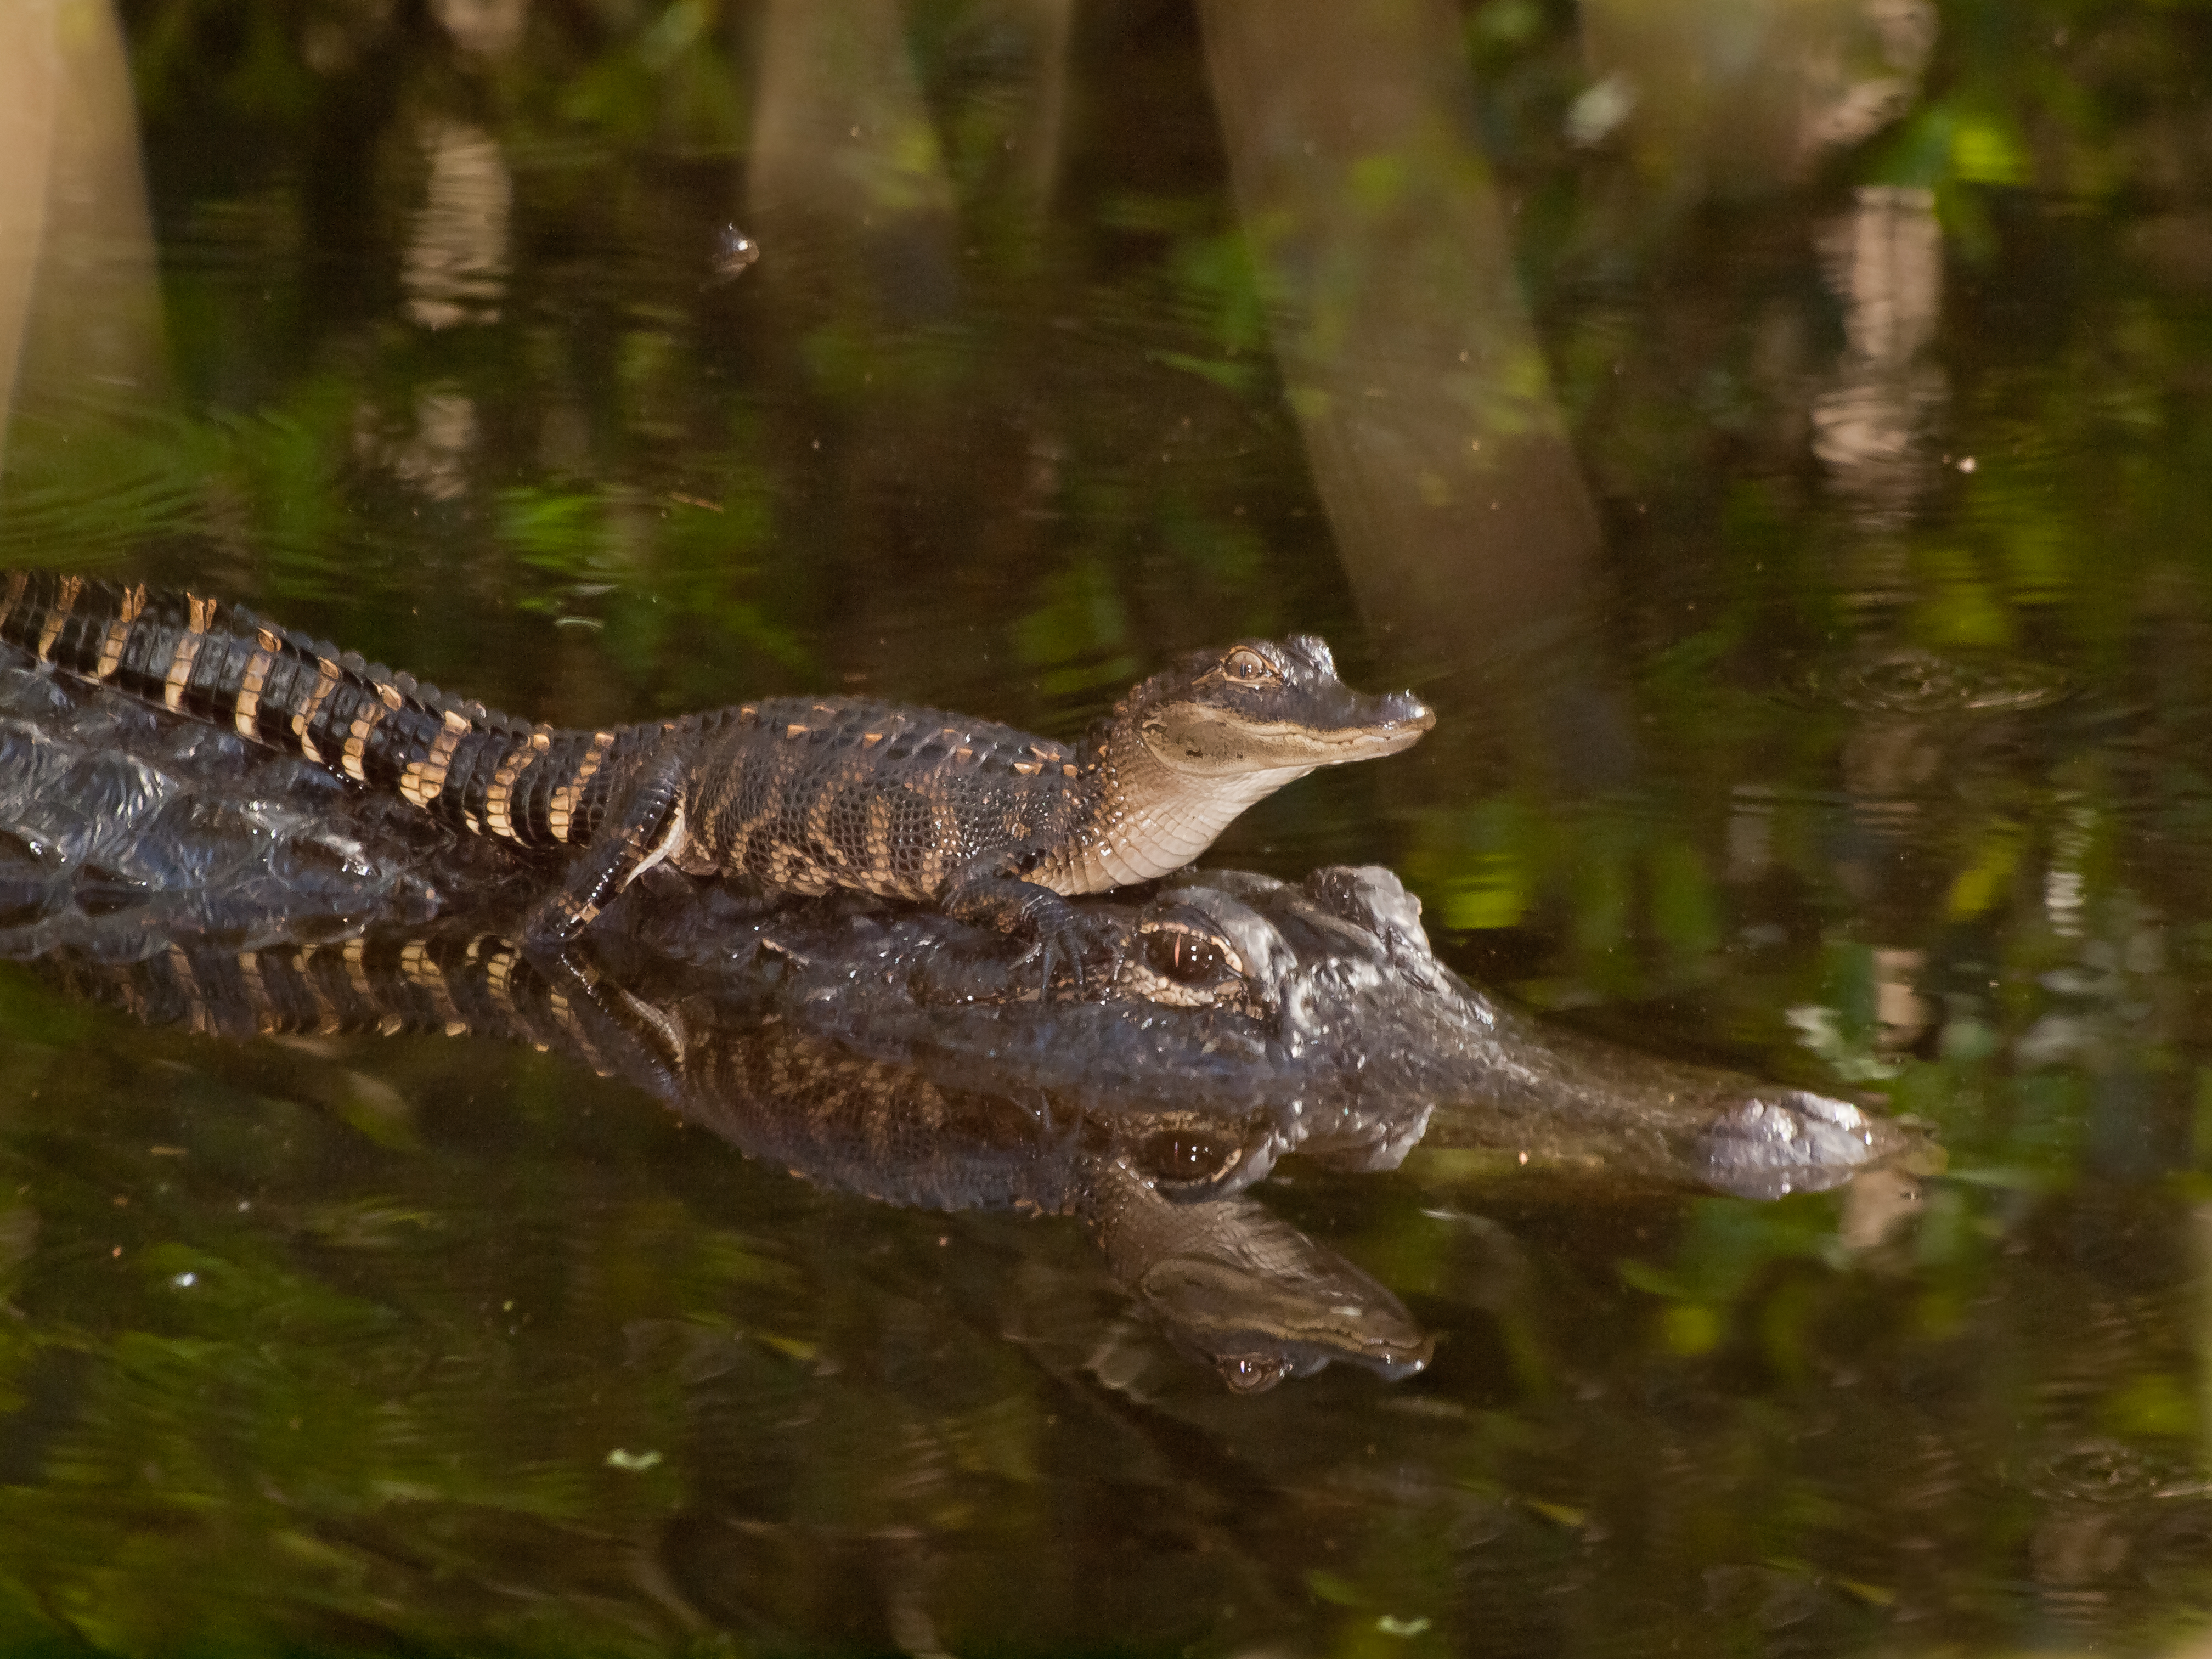 A small baby alligator riding on top of the mother alligator in the water.